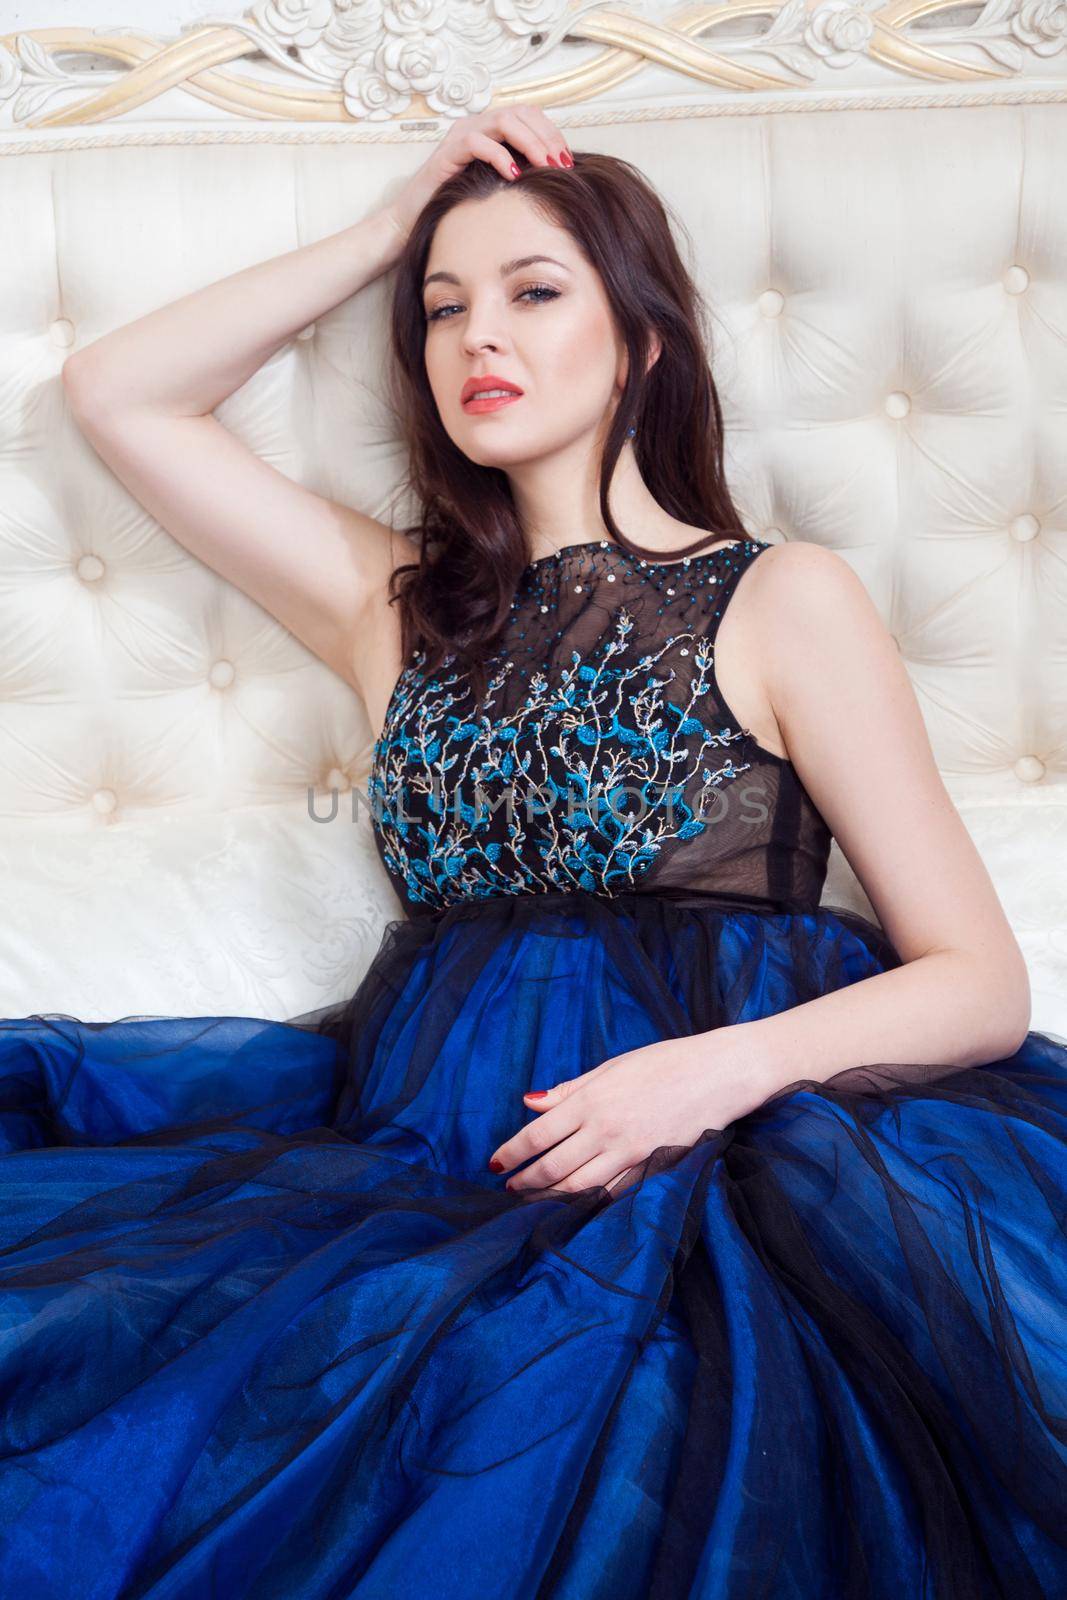 Attractive brunette woman with beautiful makeup in blue evening dress posing while sitting on bed, holding hand on head and looking at camera with pasion. indoor studio shot.